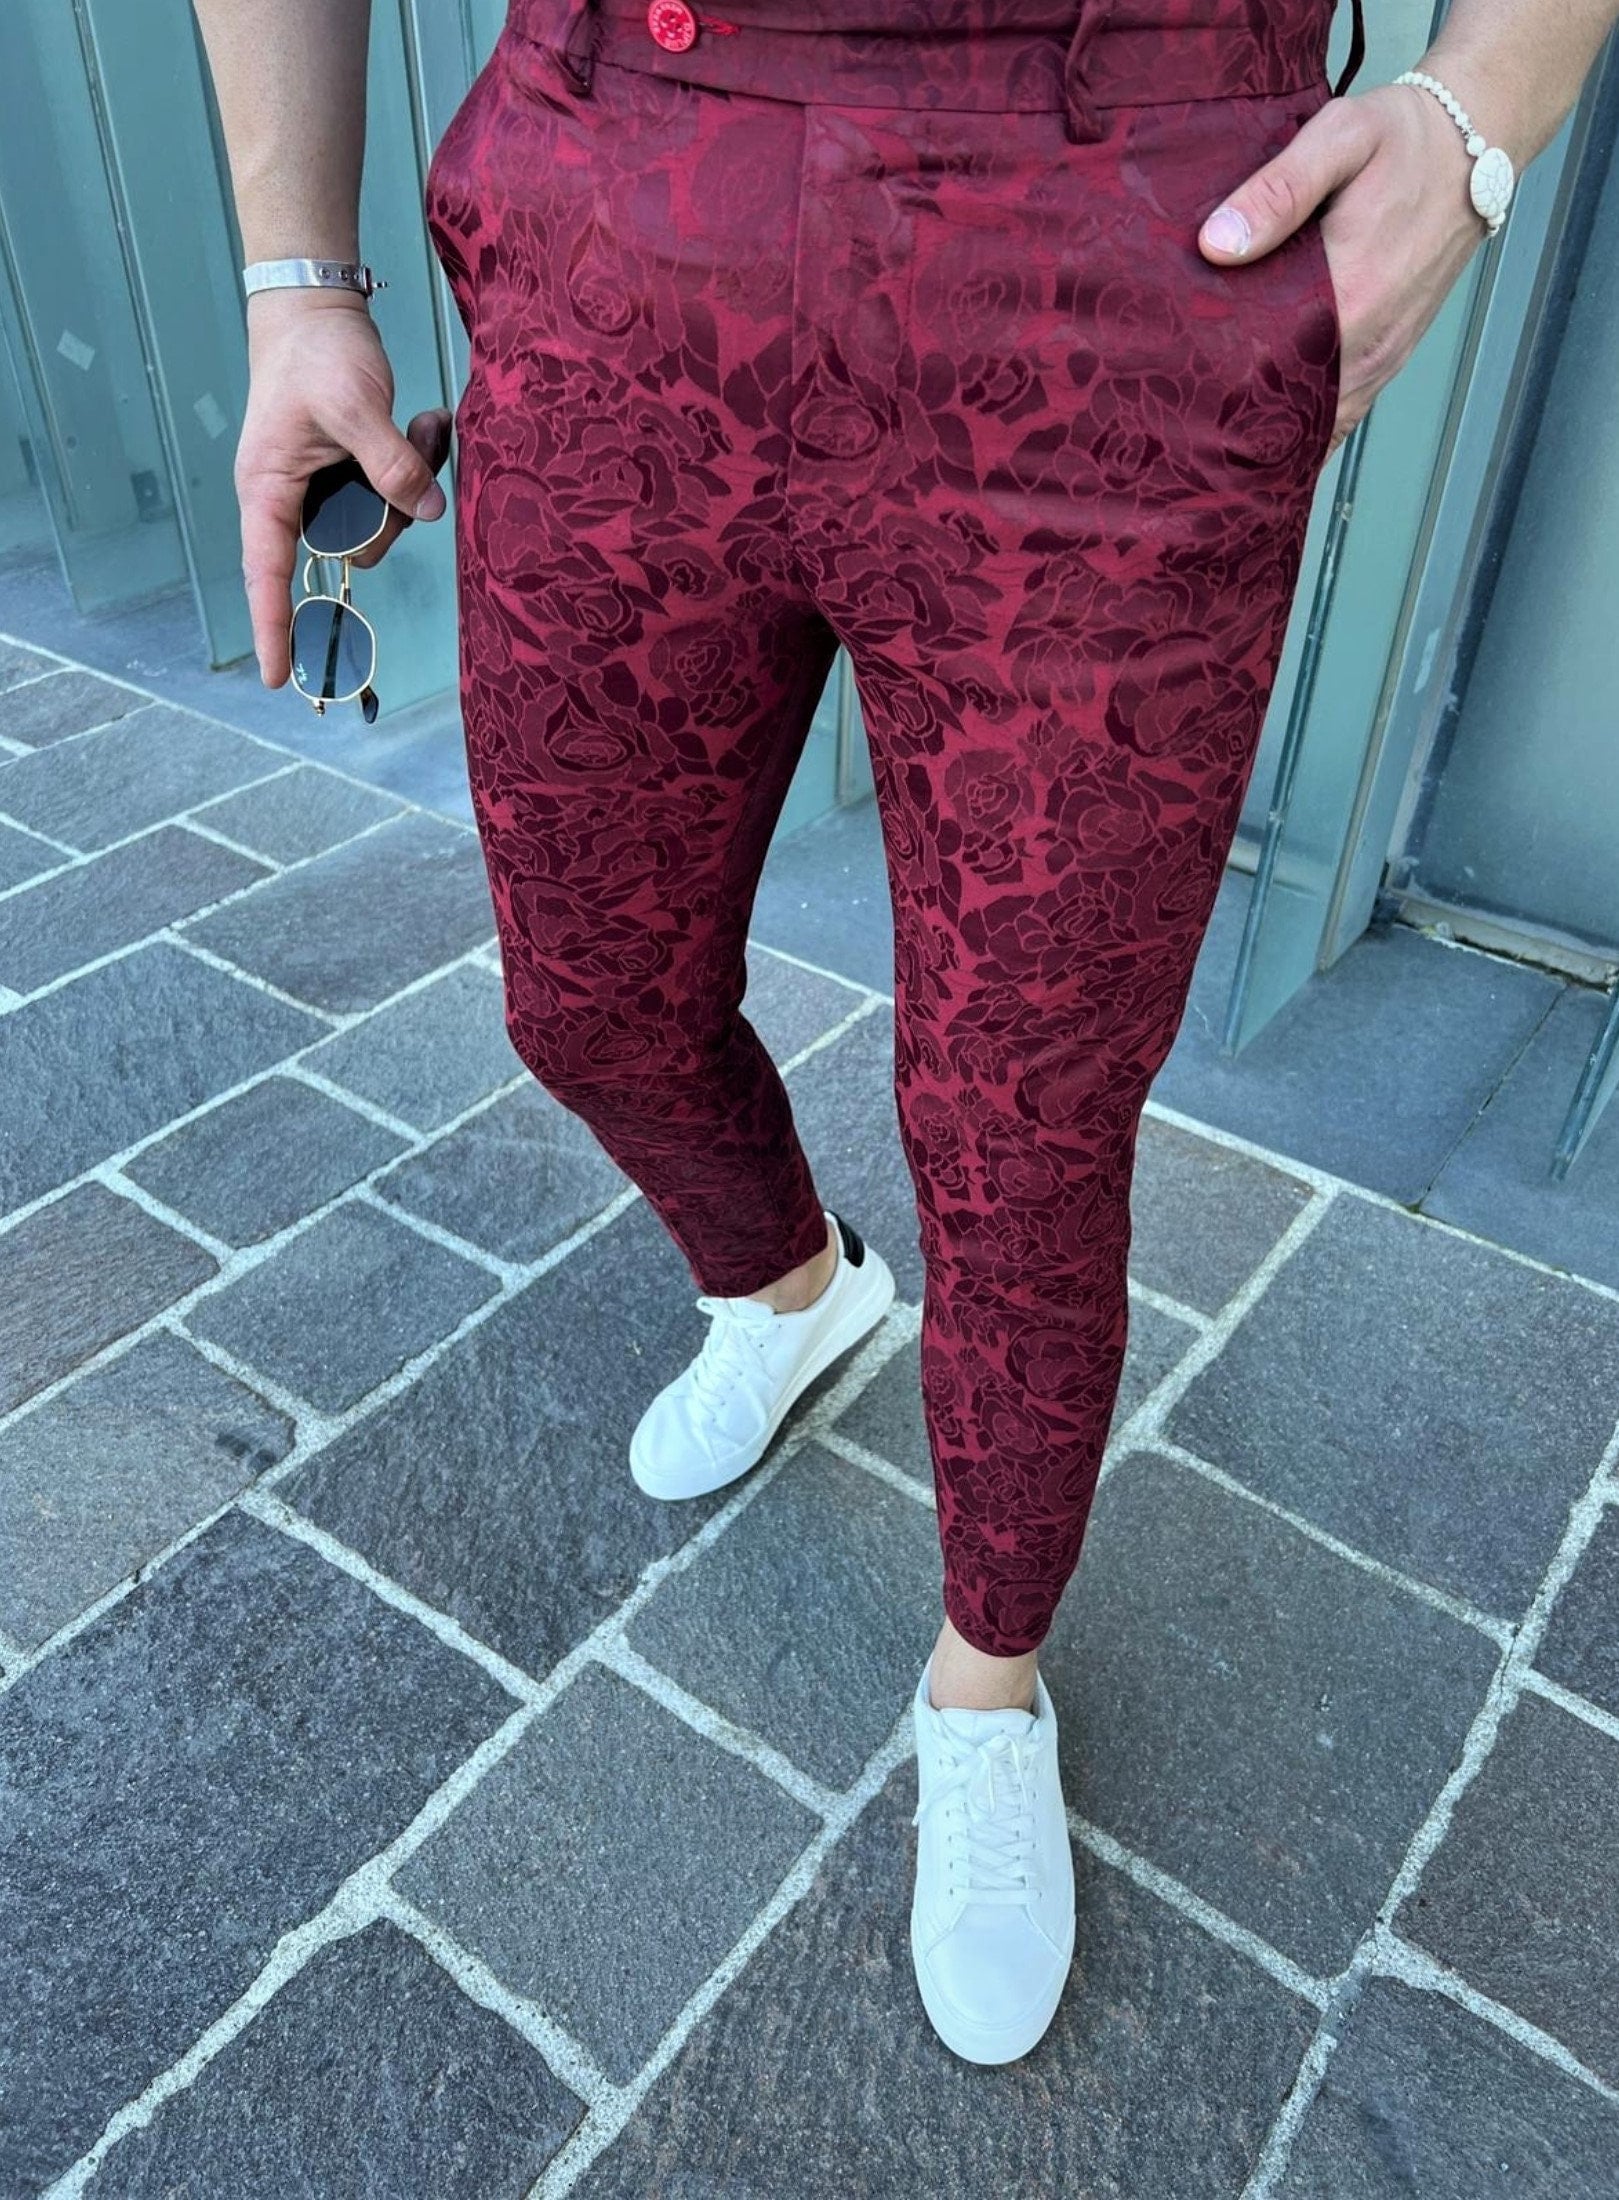 Buy Men's Blue Camouflage Cotton Lounge Pants Online in India at Bewakoof